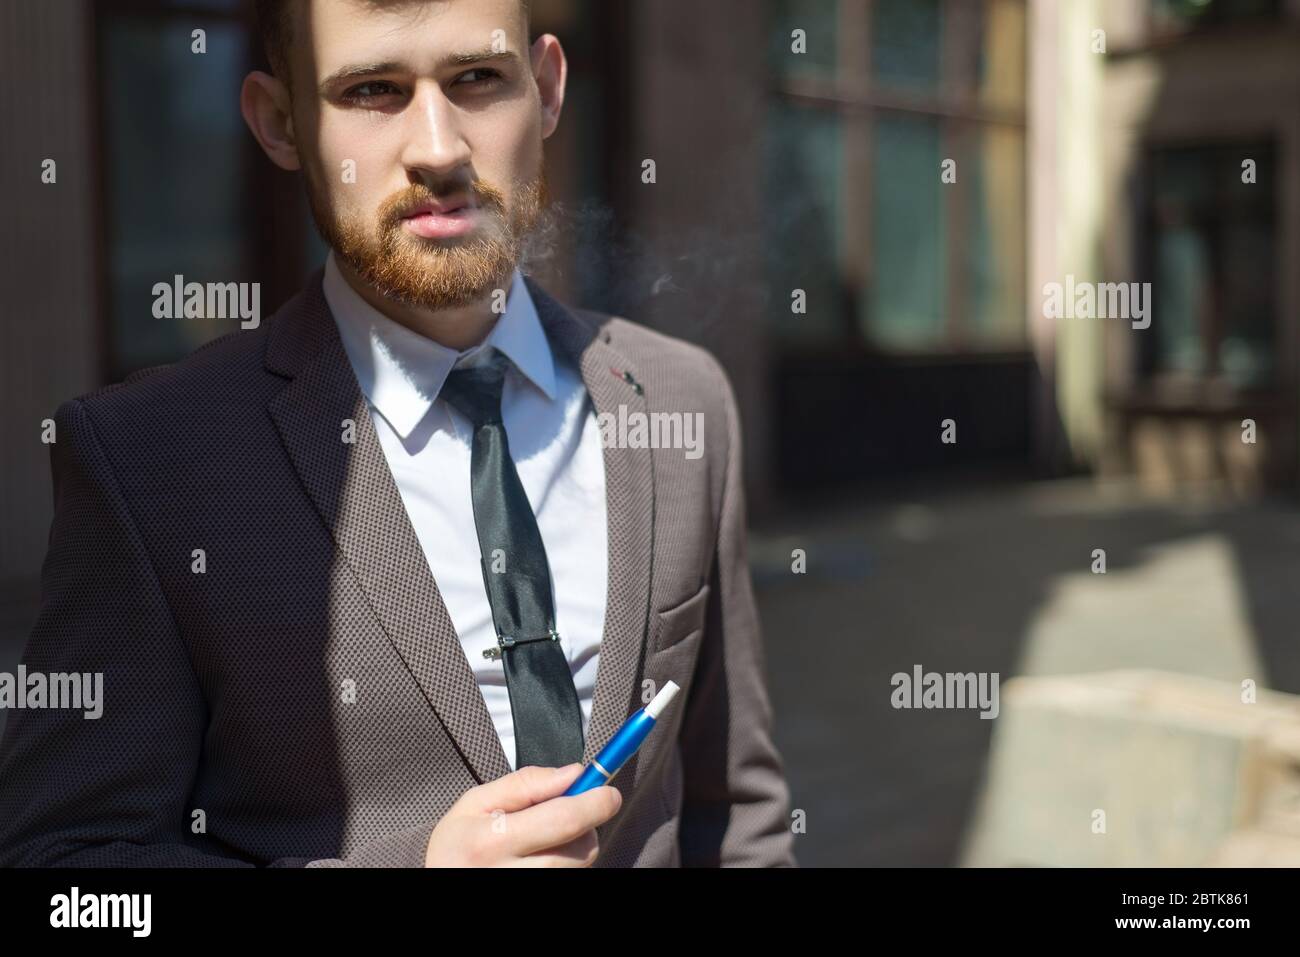 electronic cigarettes iqos. Portrait of a young bearded guy of twenty-five years old, stands by the textured wall of the building, smokes a cigarette. Stock Photo